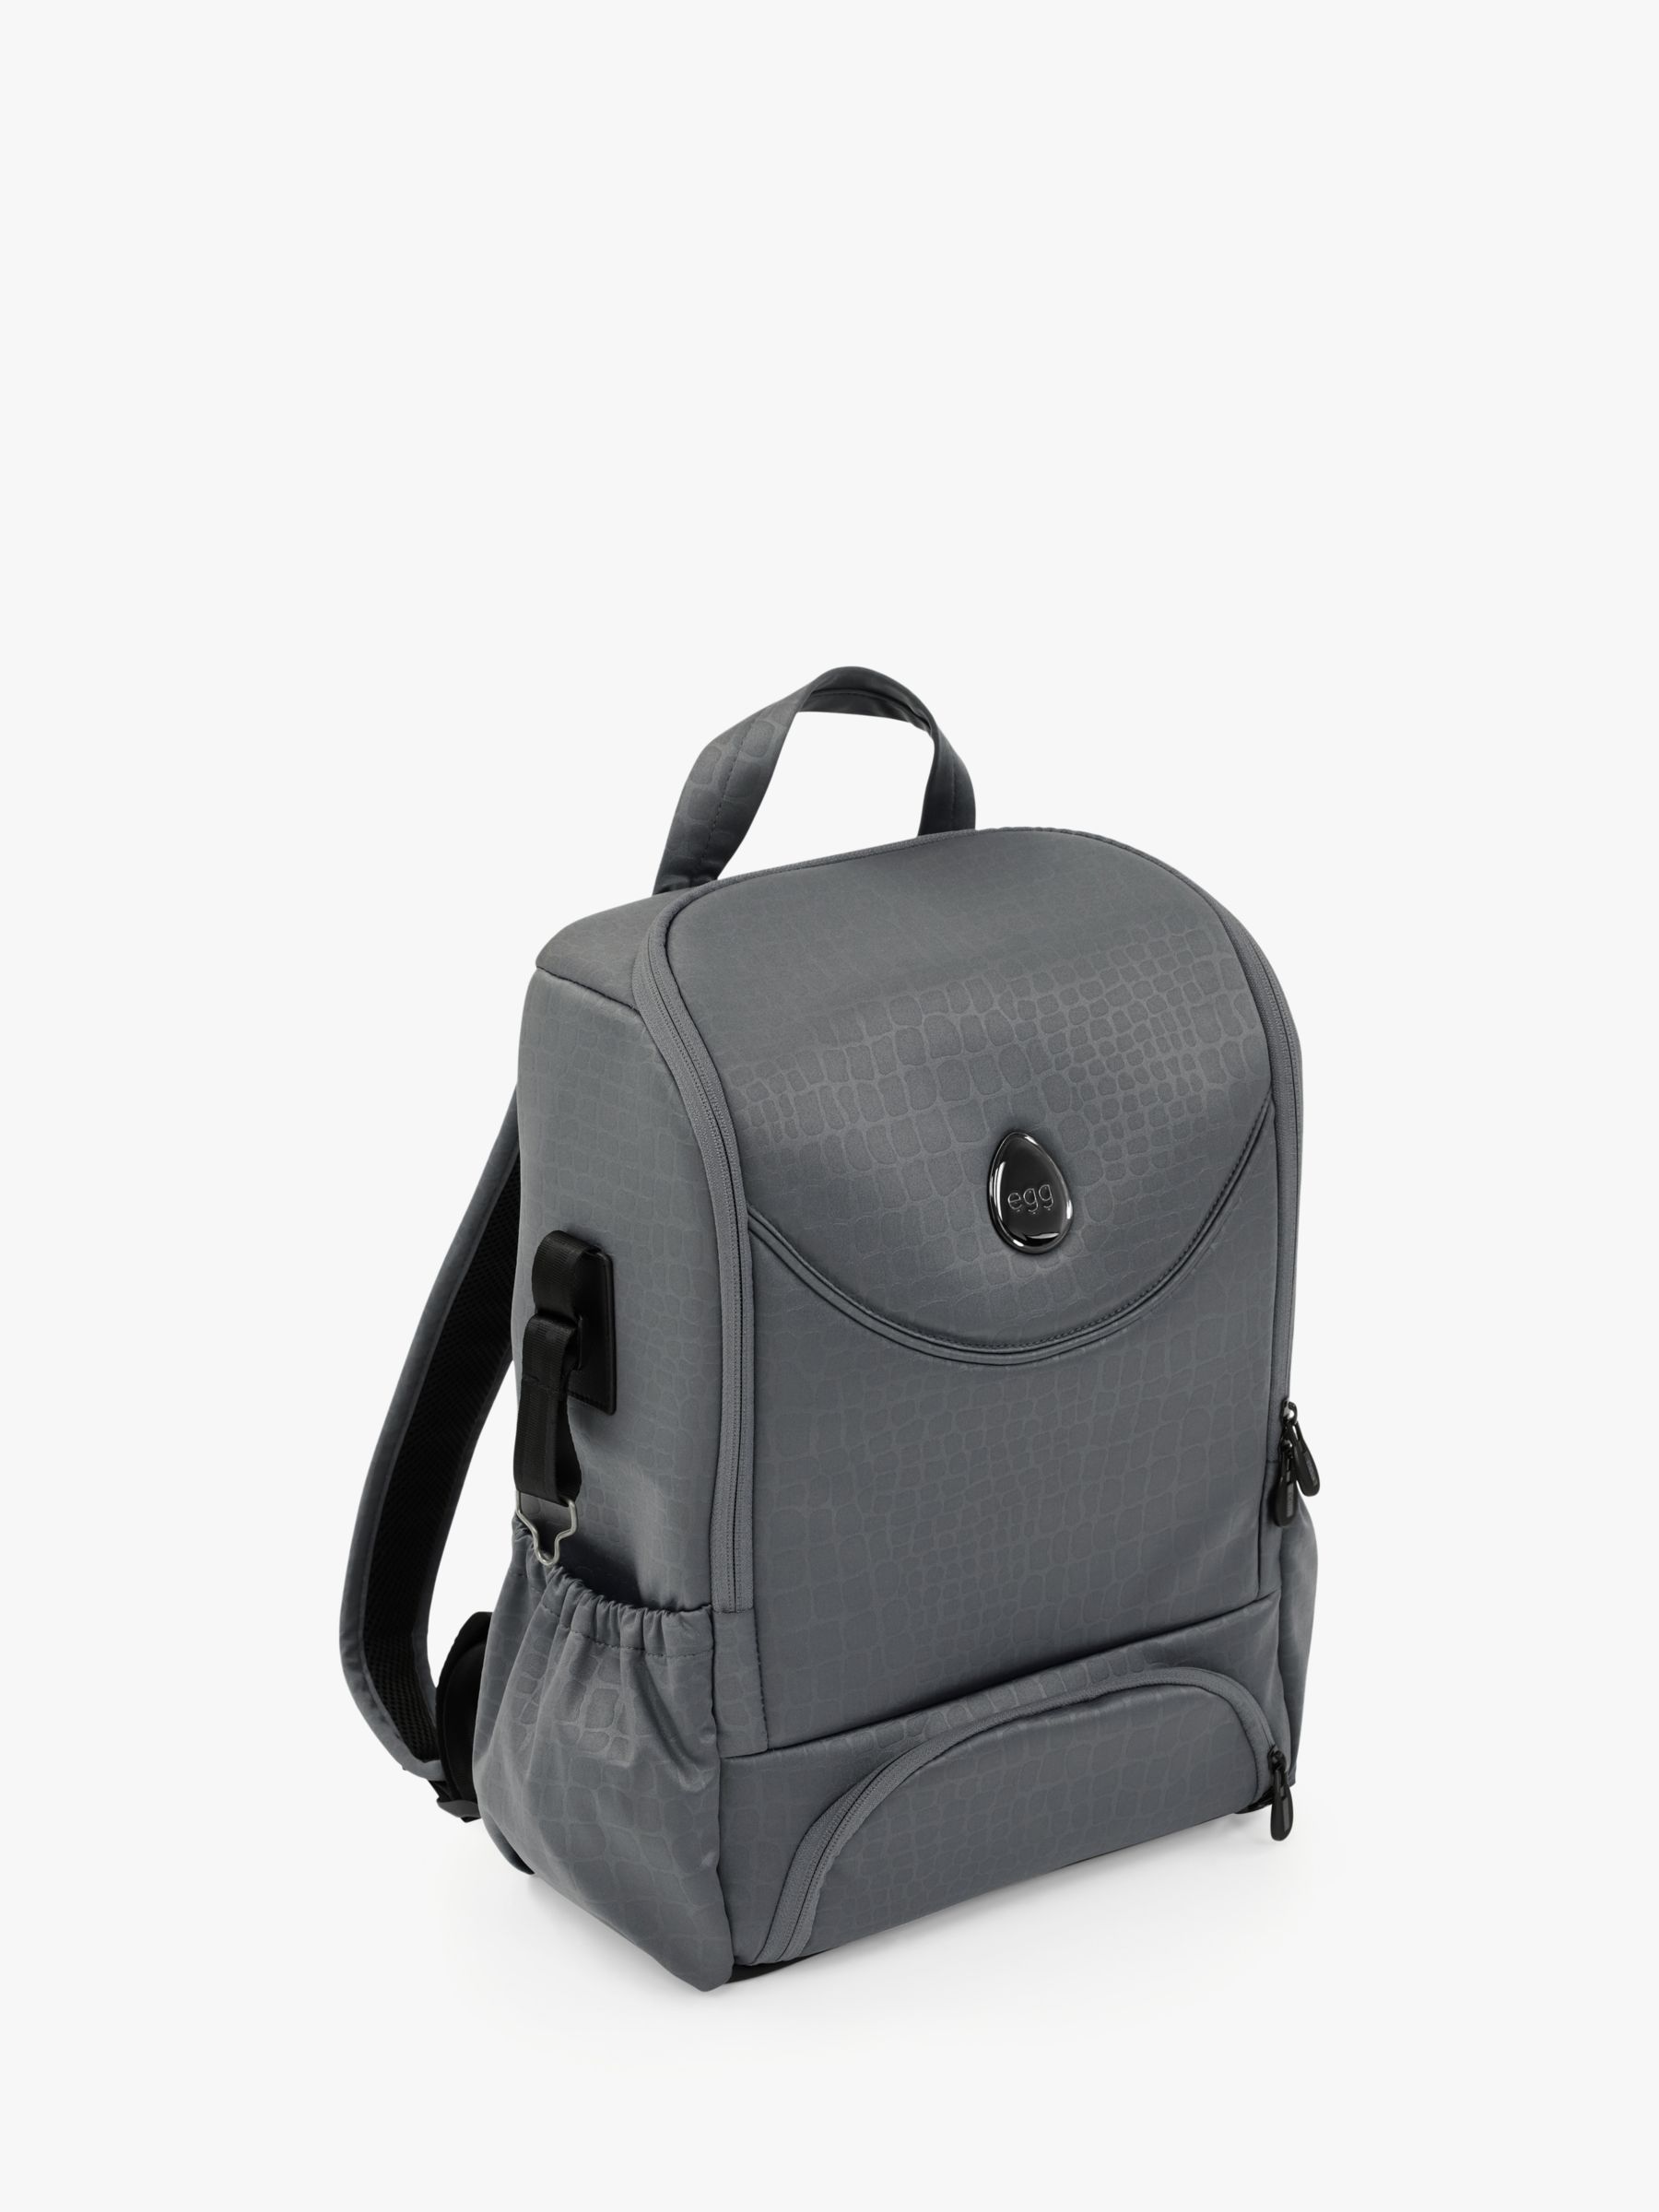 egg® Changing Backpack (Anthracite) from